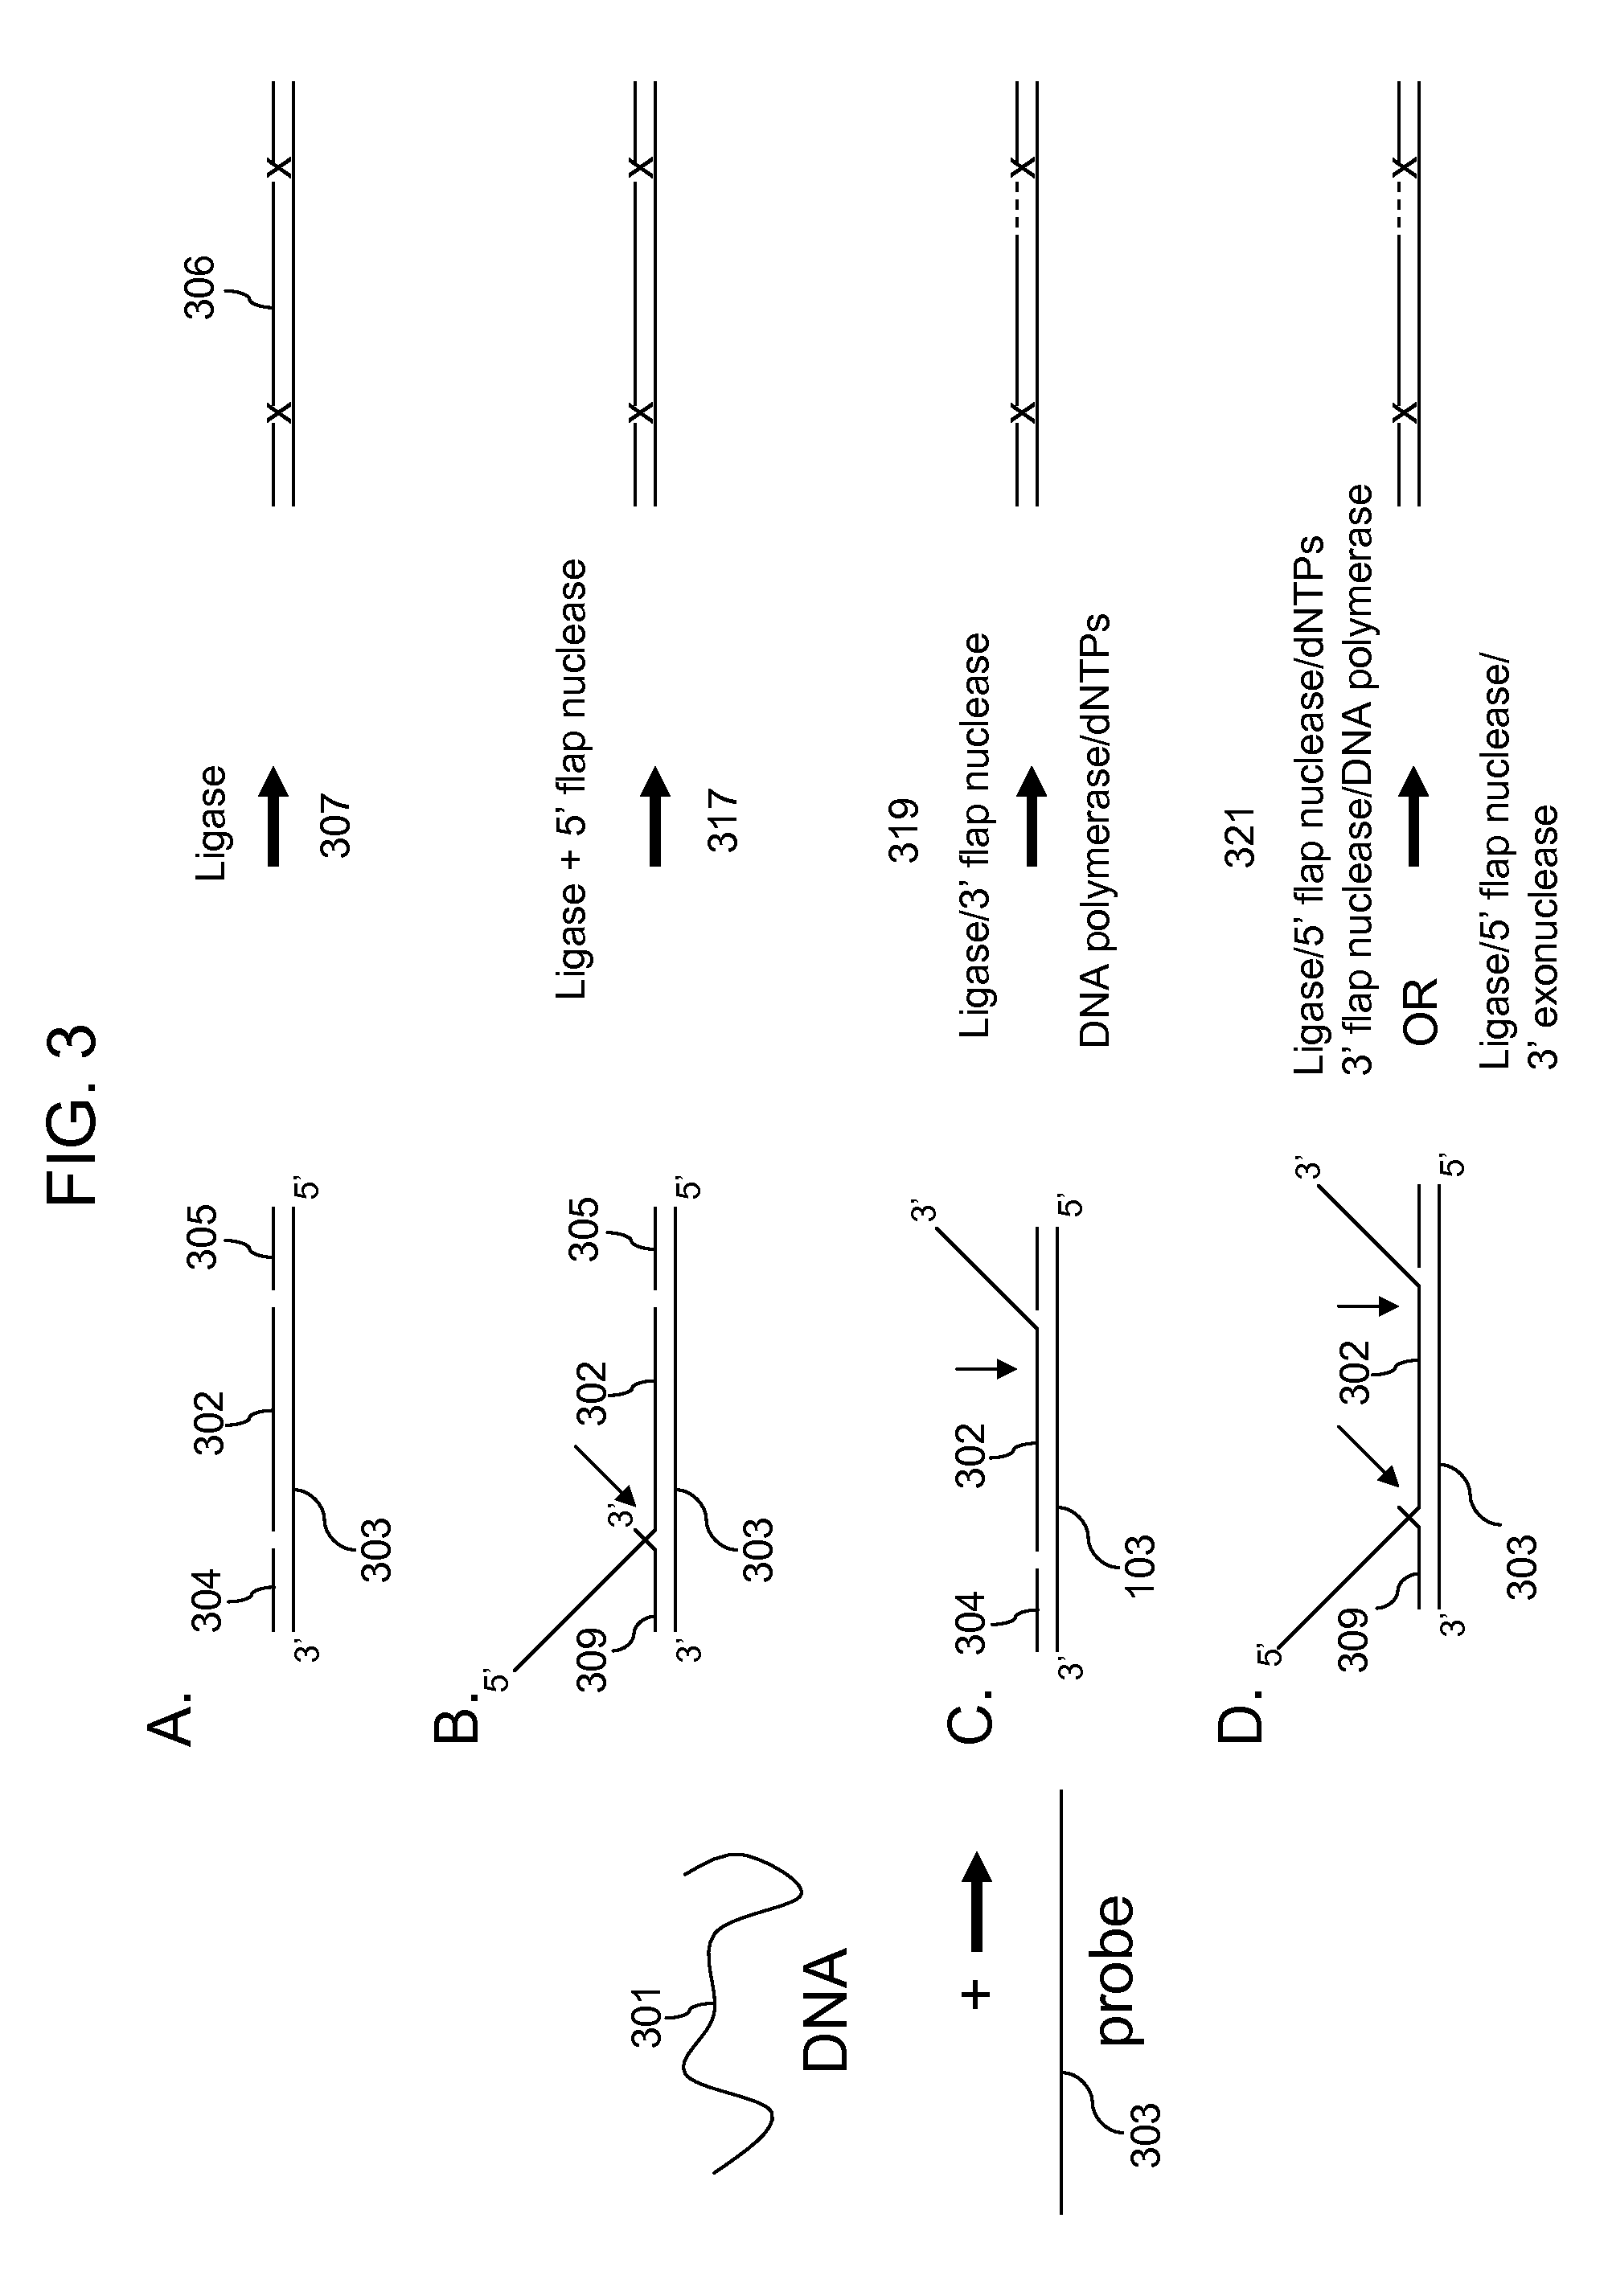 Multiplex targeted amplification using flap nuclease